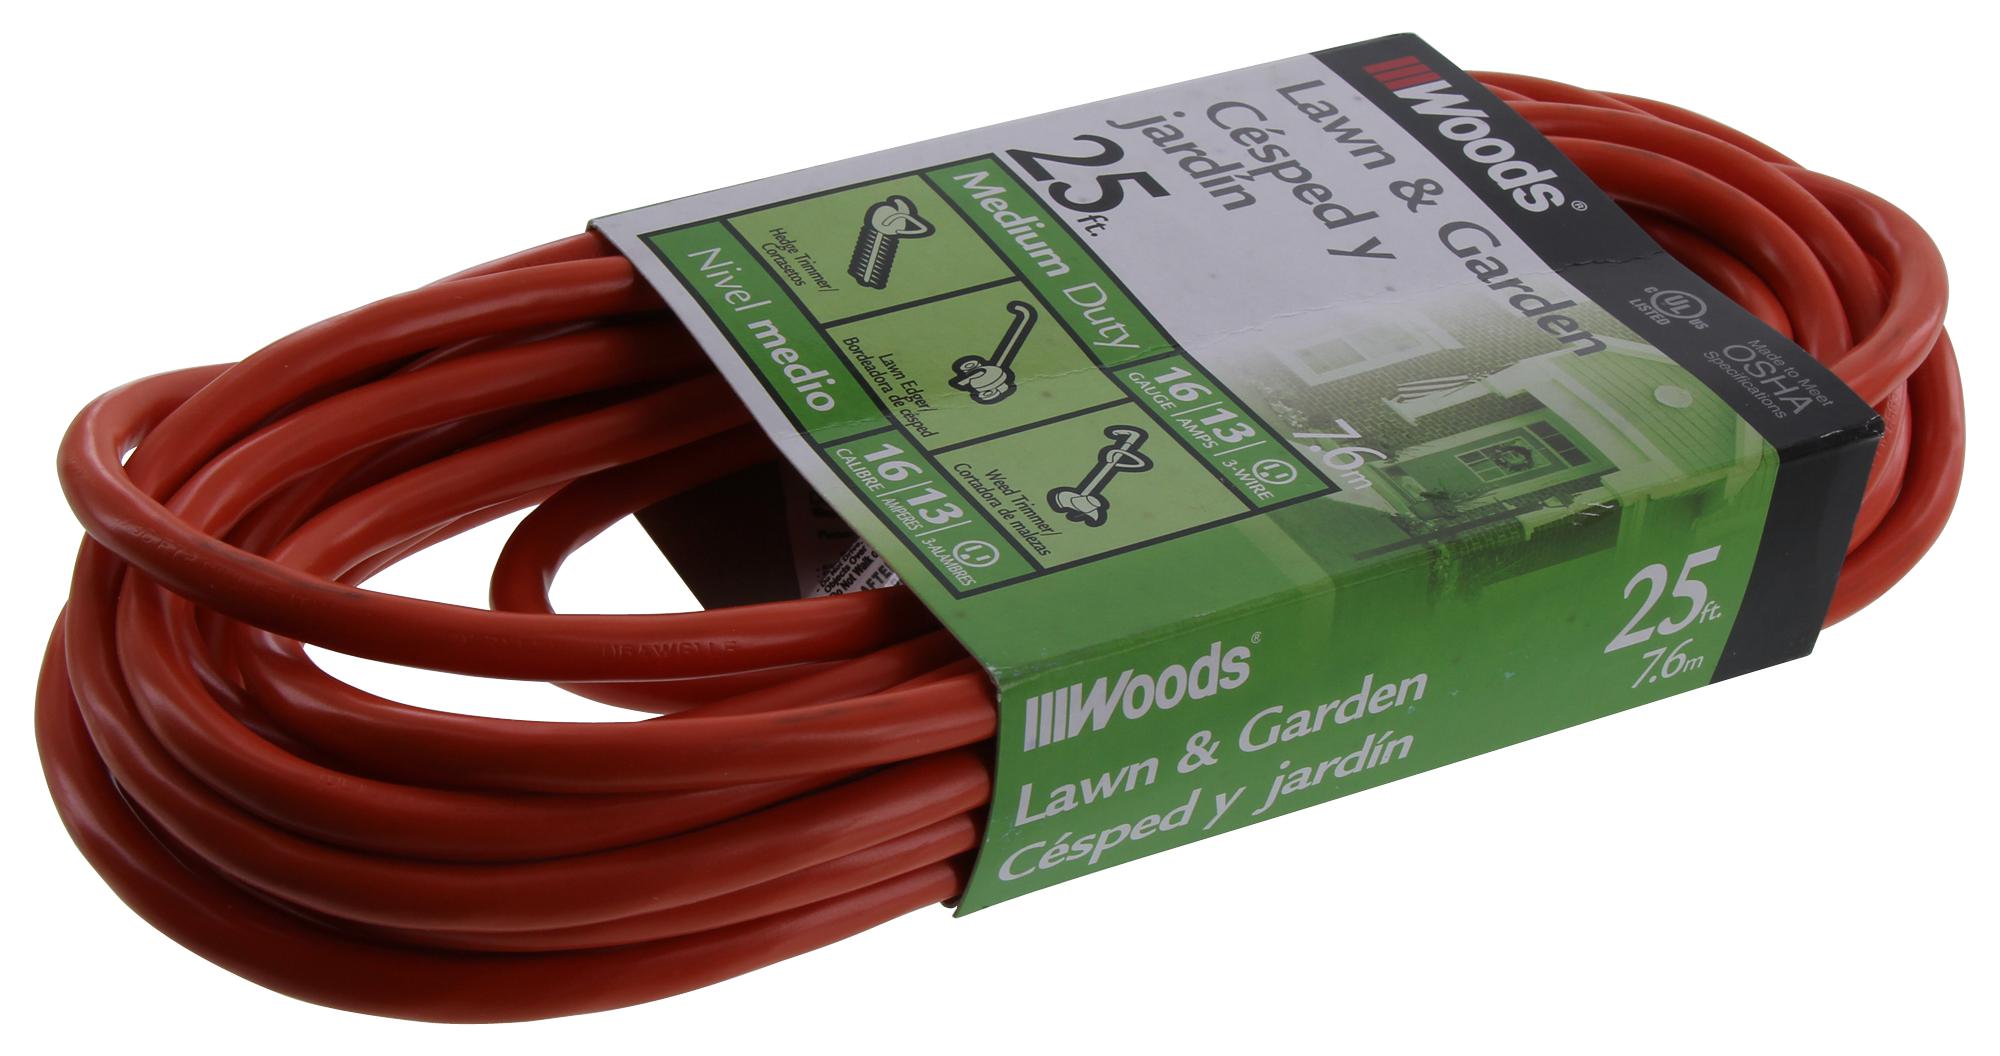 GC Electronics 267 Outdoor Extension Cord 25Ft, 13A, Orange